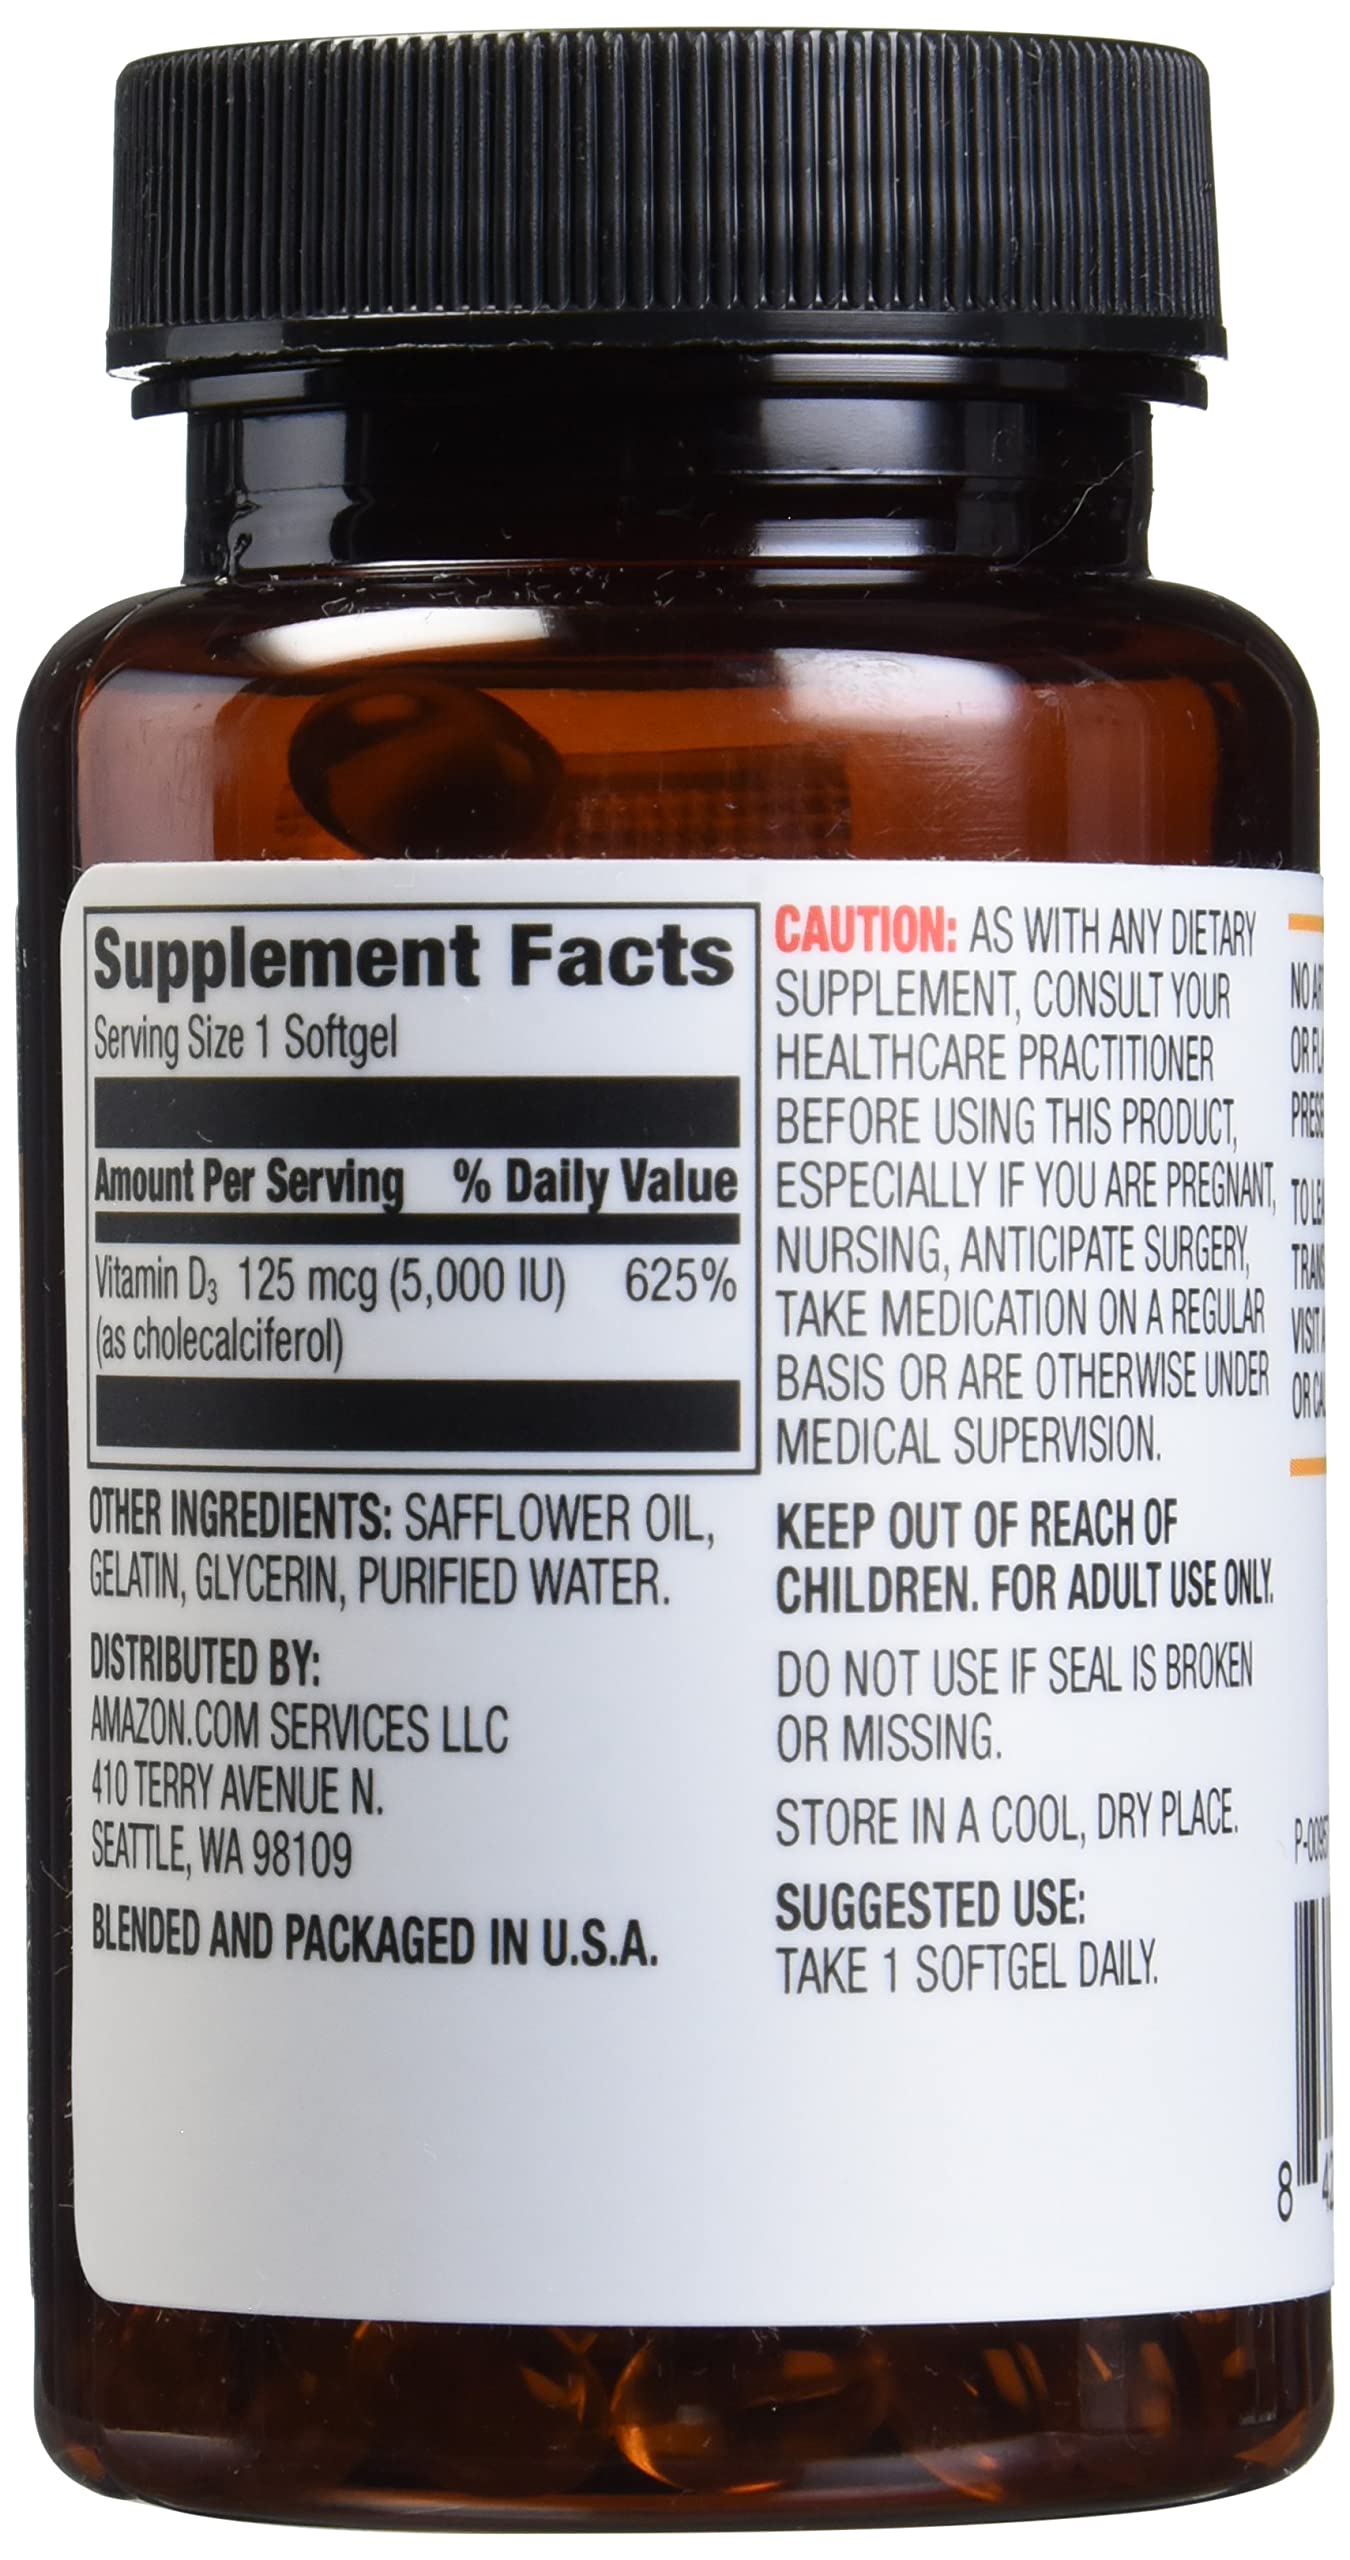 Amazon Elements Vitamin D3, 5000 IU, 180 Softgels, 6 month supply (Packaging may vary), Supports Strong Bones and Immune Health